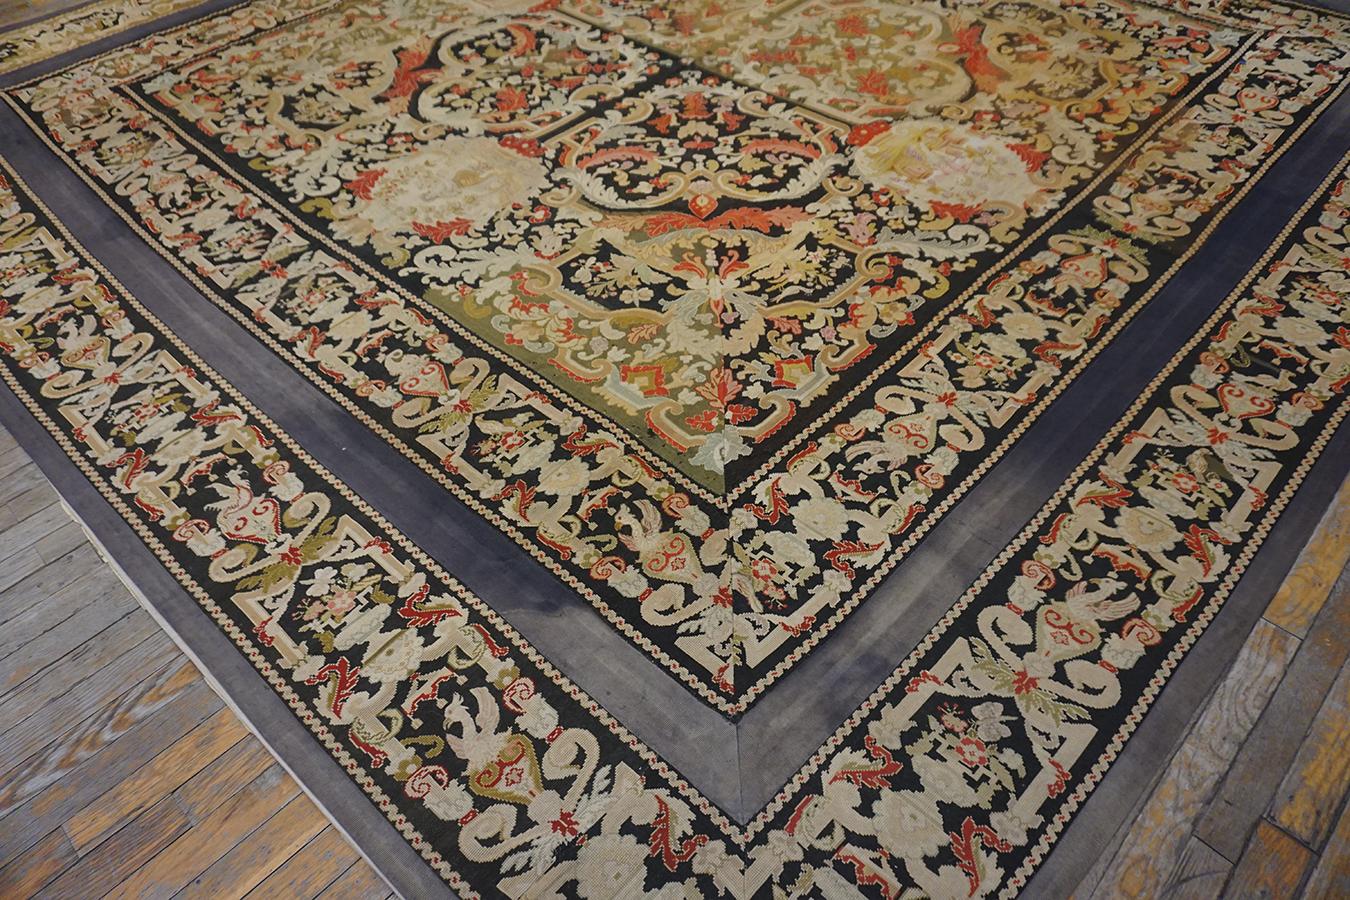 19th Century French Needlepoint Carpet ( 11' x 11' - 335 x 335 ) For Sale 4